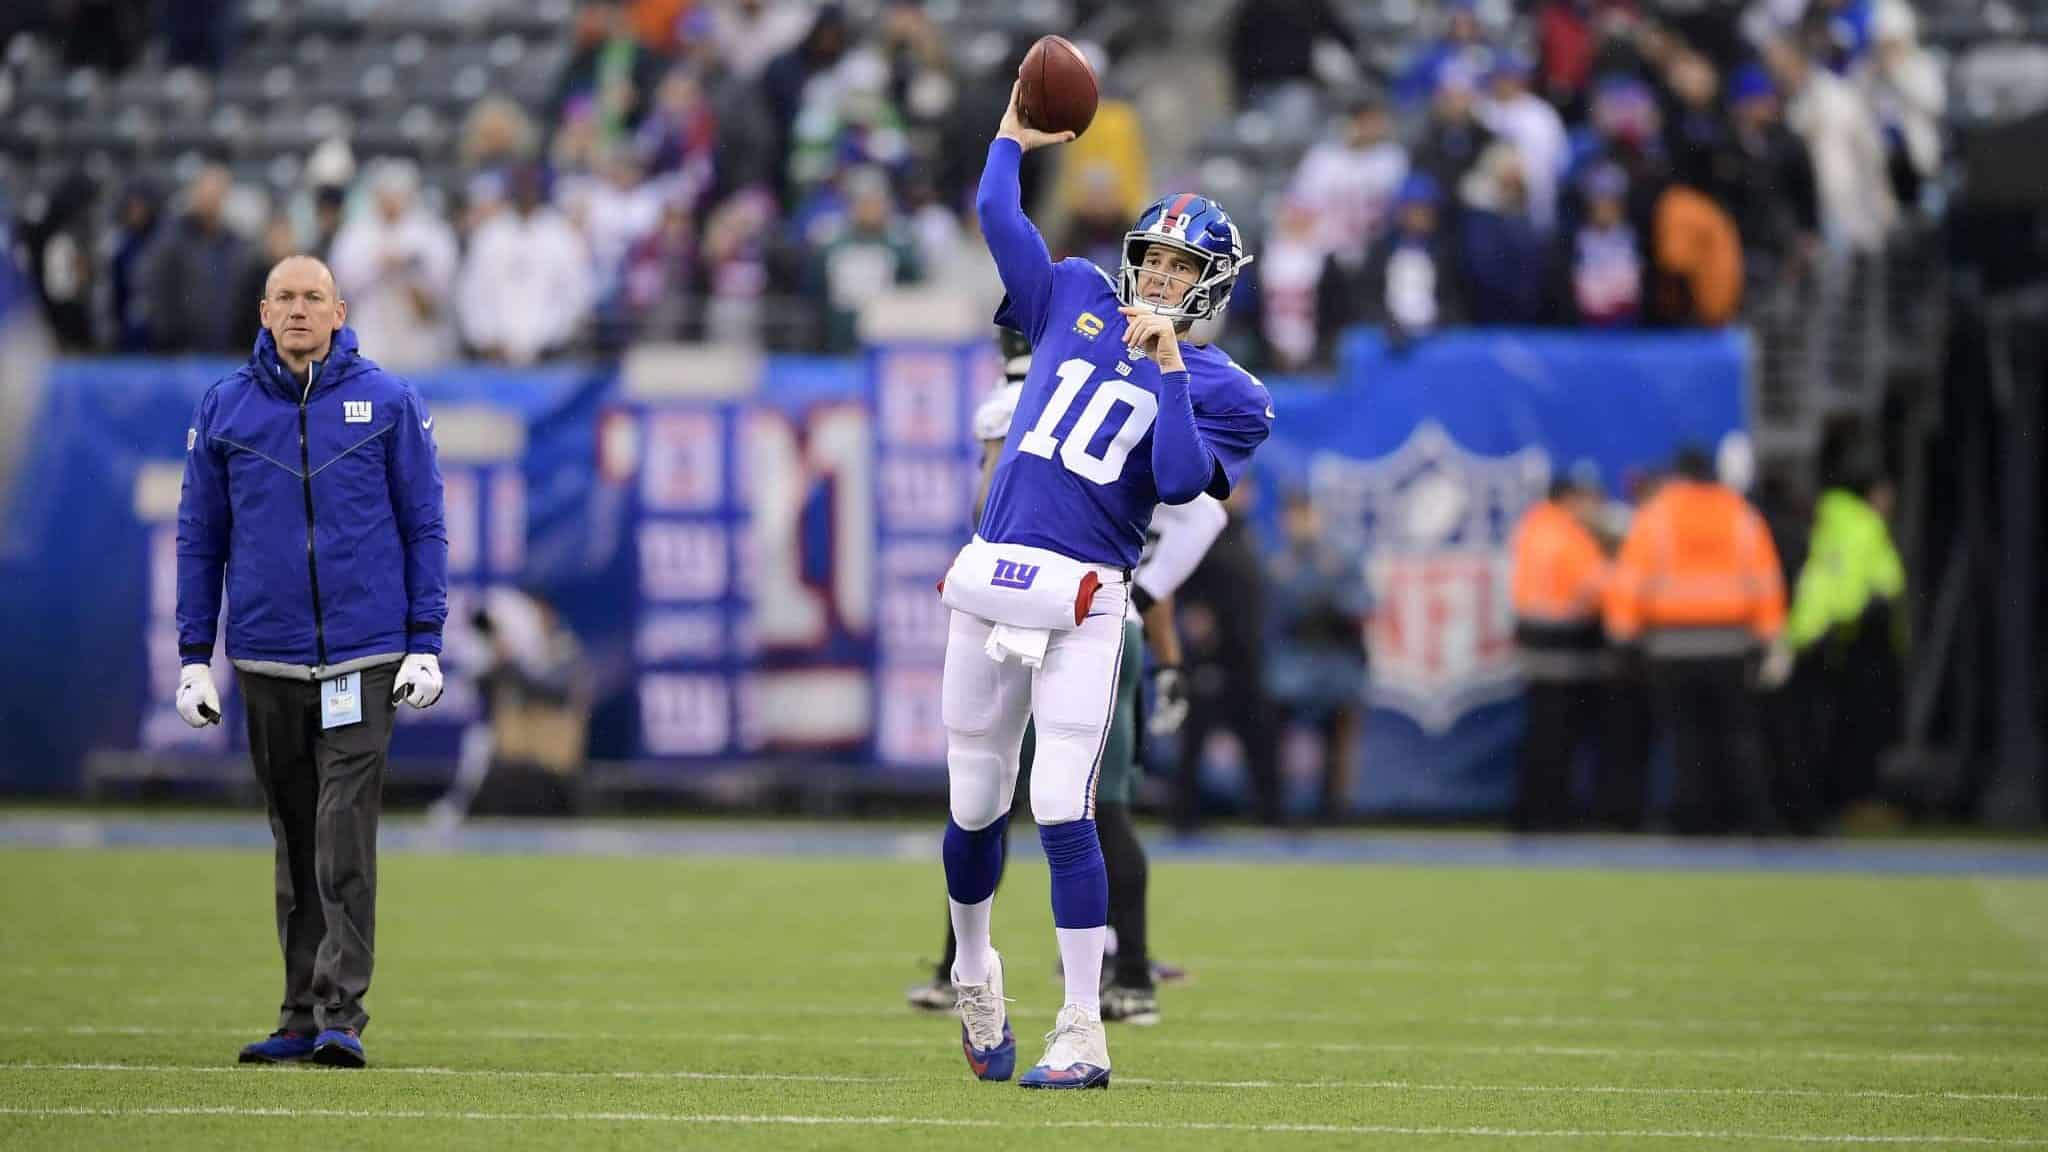 EAST RUTHERFORD, NEW JERSEY - DECEMBER 29: Eli Manning #10 of the New York Giants warms up prior to the game against the Philadelphia Eagles at MetLife Stadium on December 29, 2019 in East Rutherford, New Jersey.